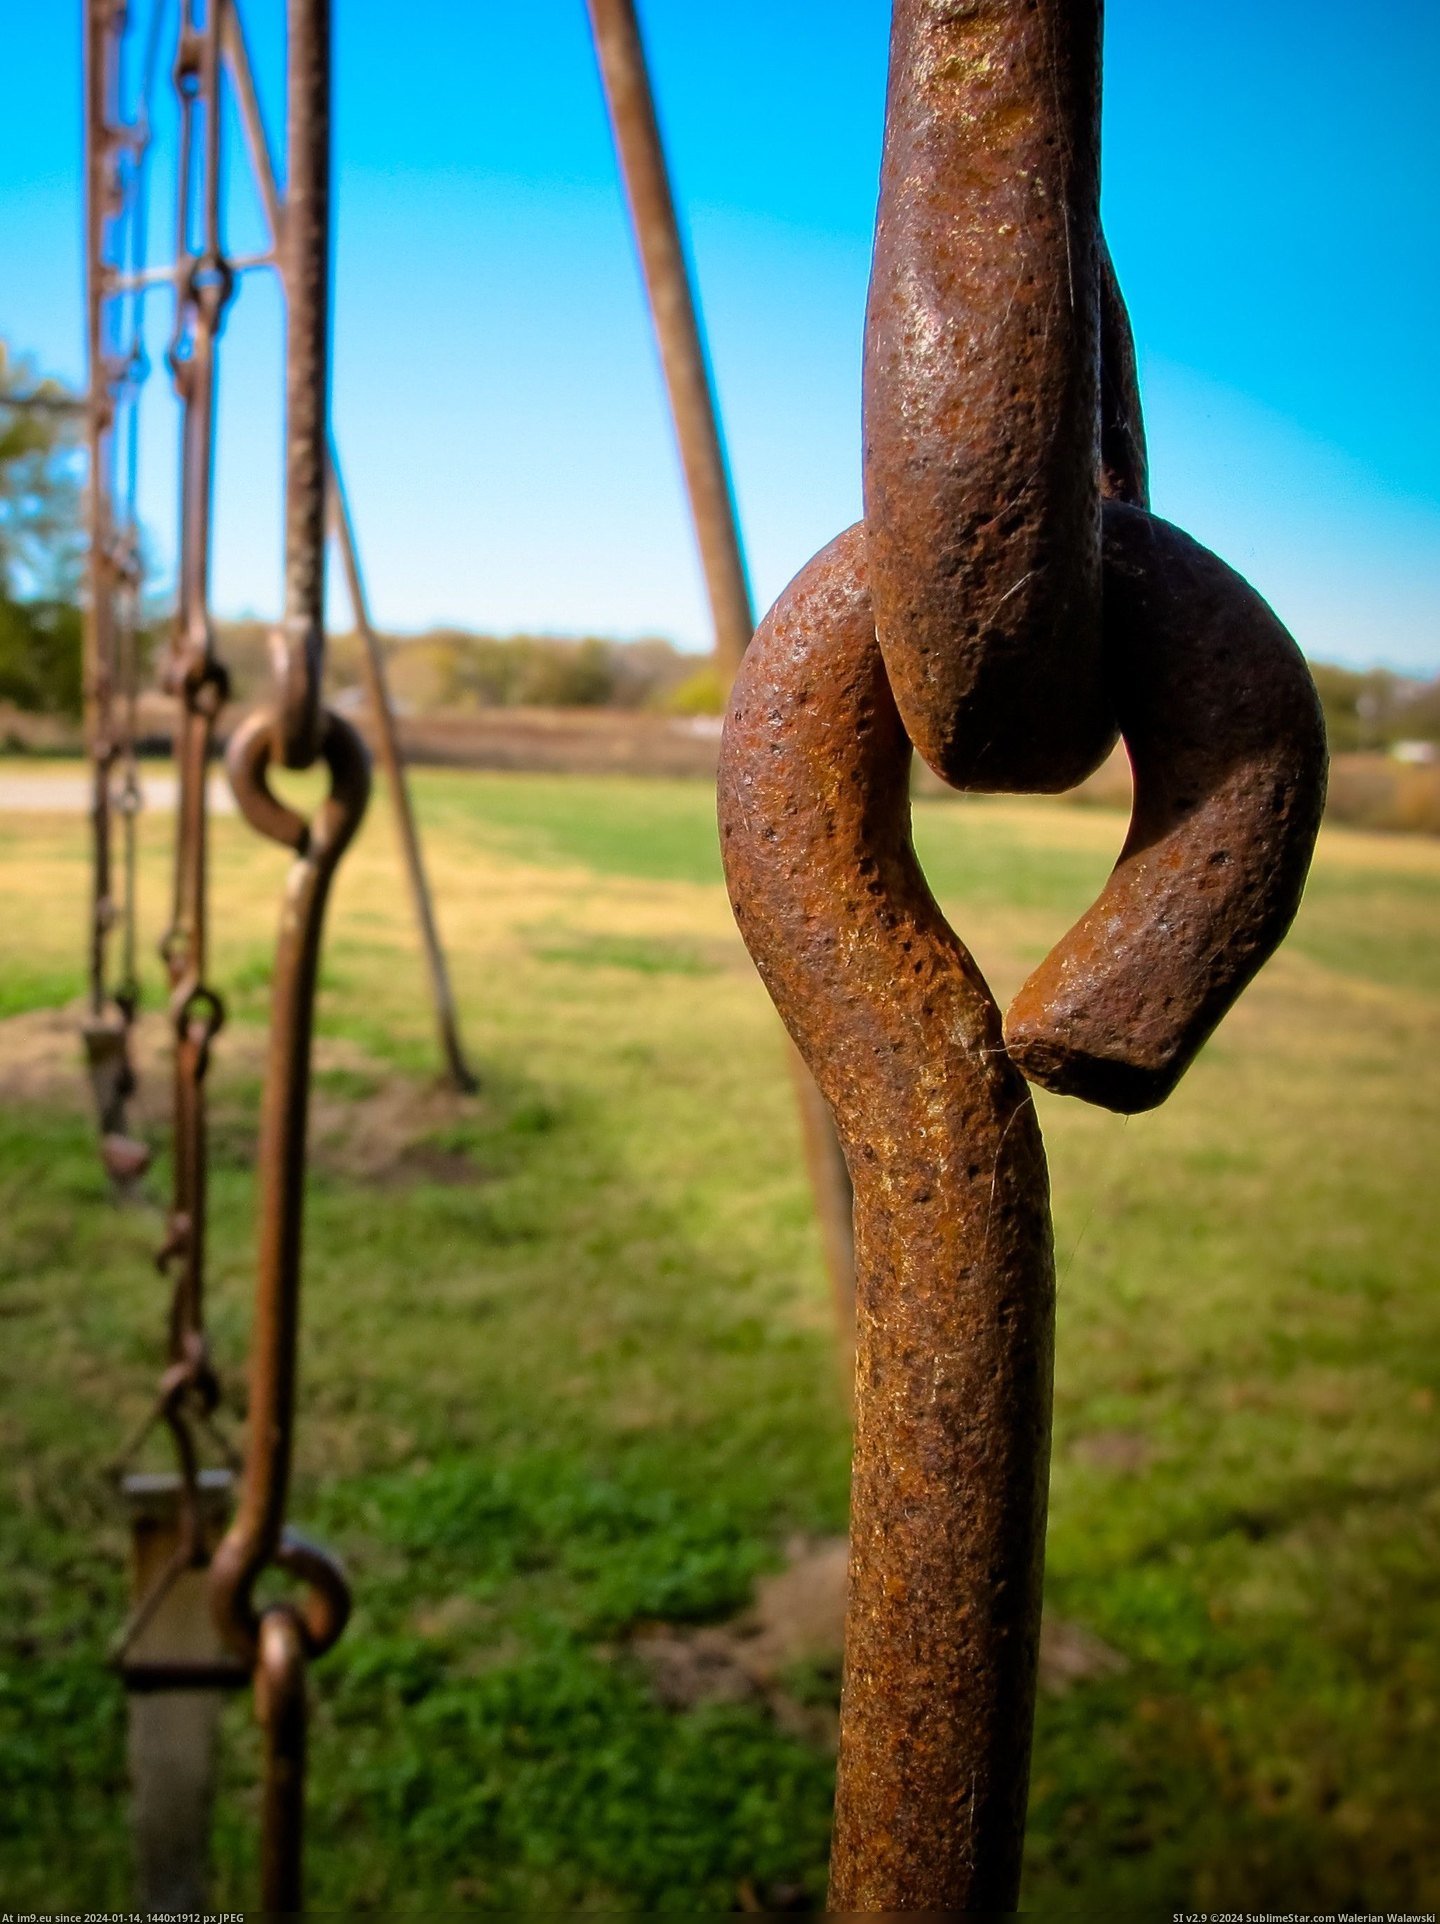 #Old #School #But #Swing #Chains #Hooks #Abandoned #Metal #Set [Pics] I found an old swing set at an abandoned school that didn't have chains, but metal hooks. Pic. (Изображение из альбом My r/PICS favs))